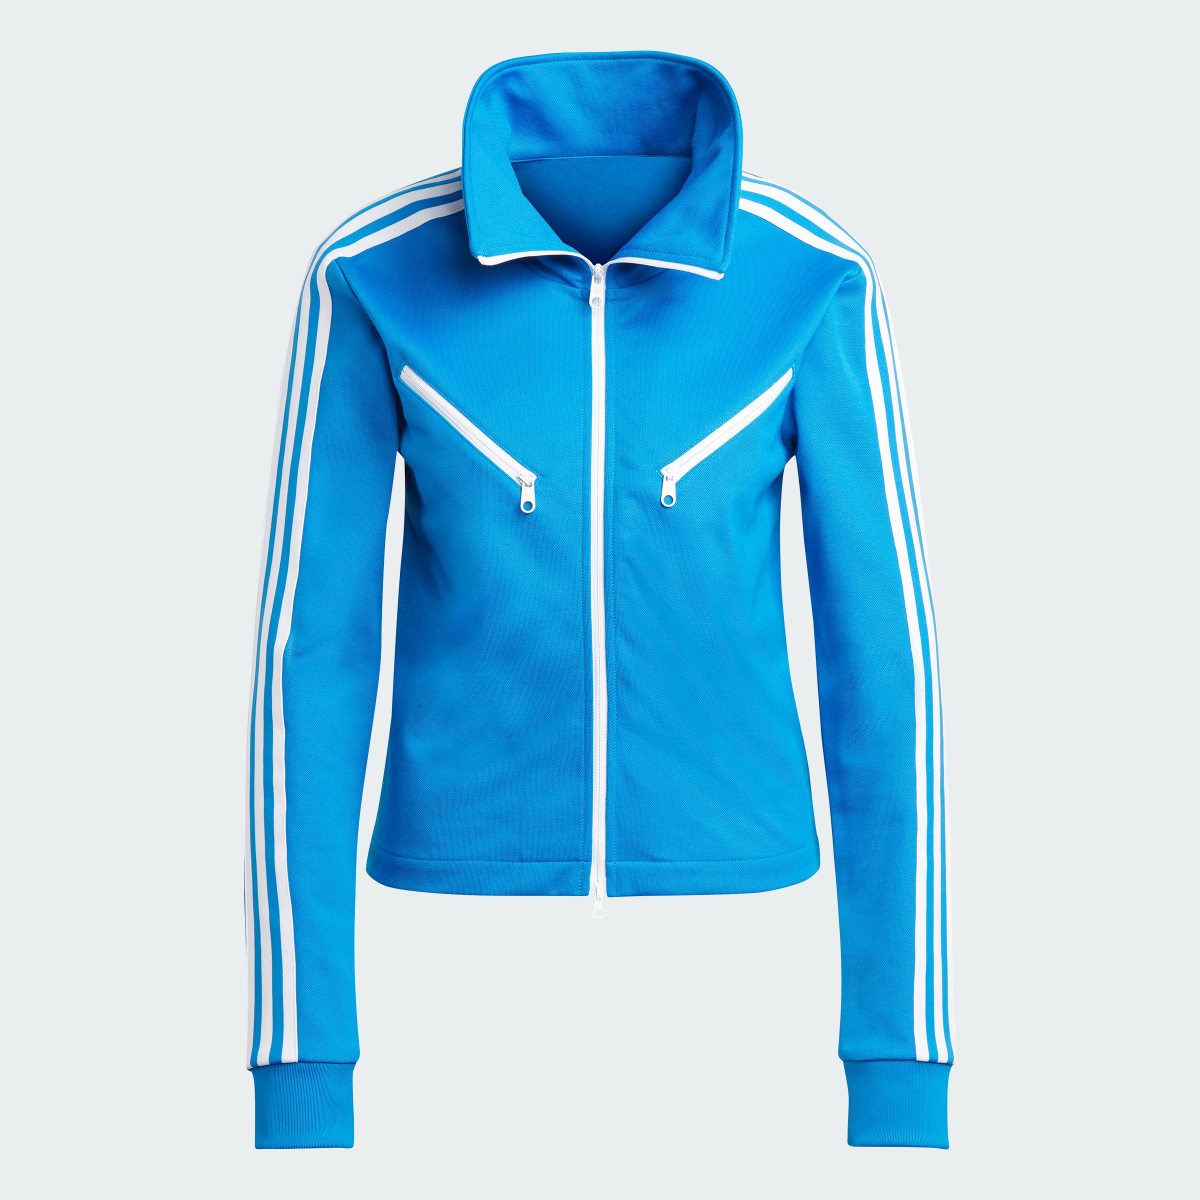 Adidas Track top Blue Version Montreal. 5